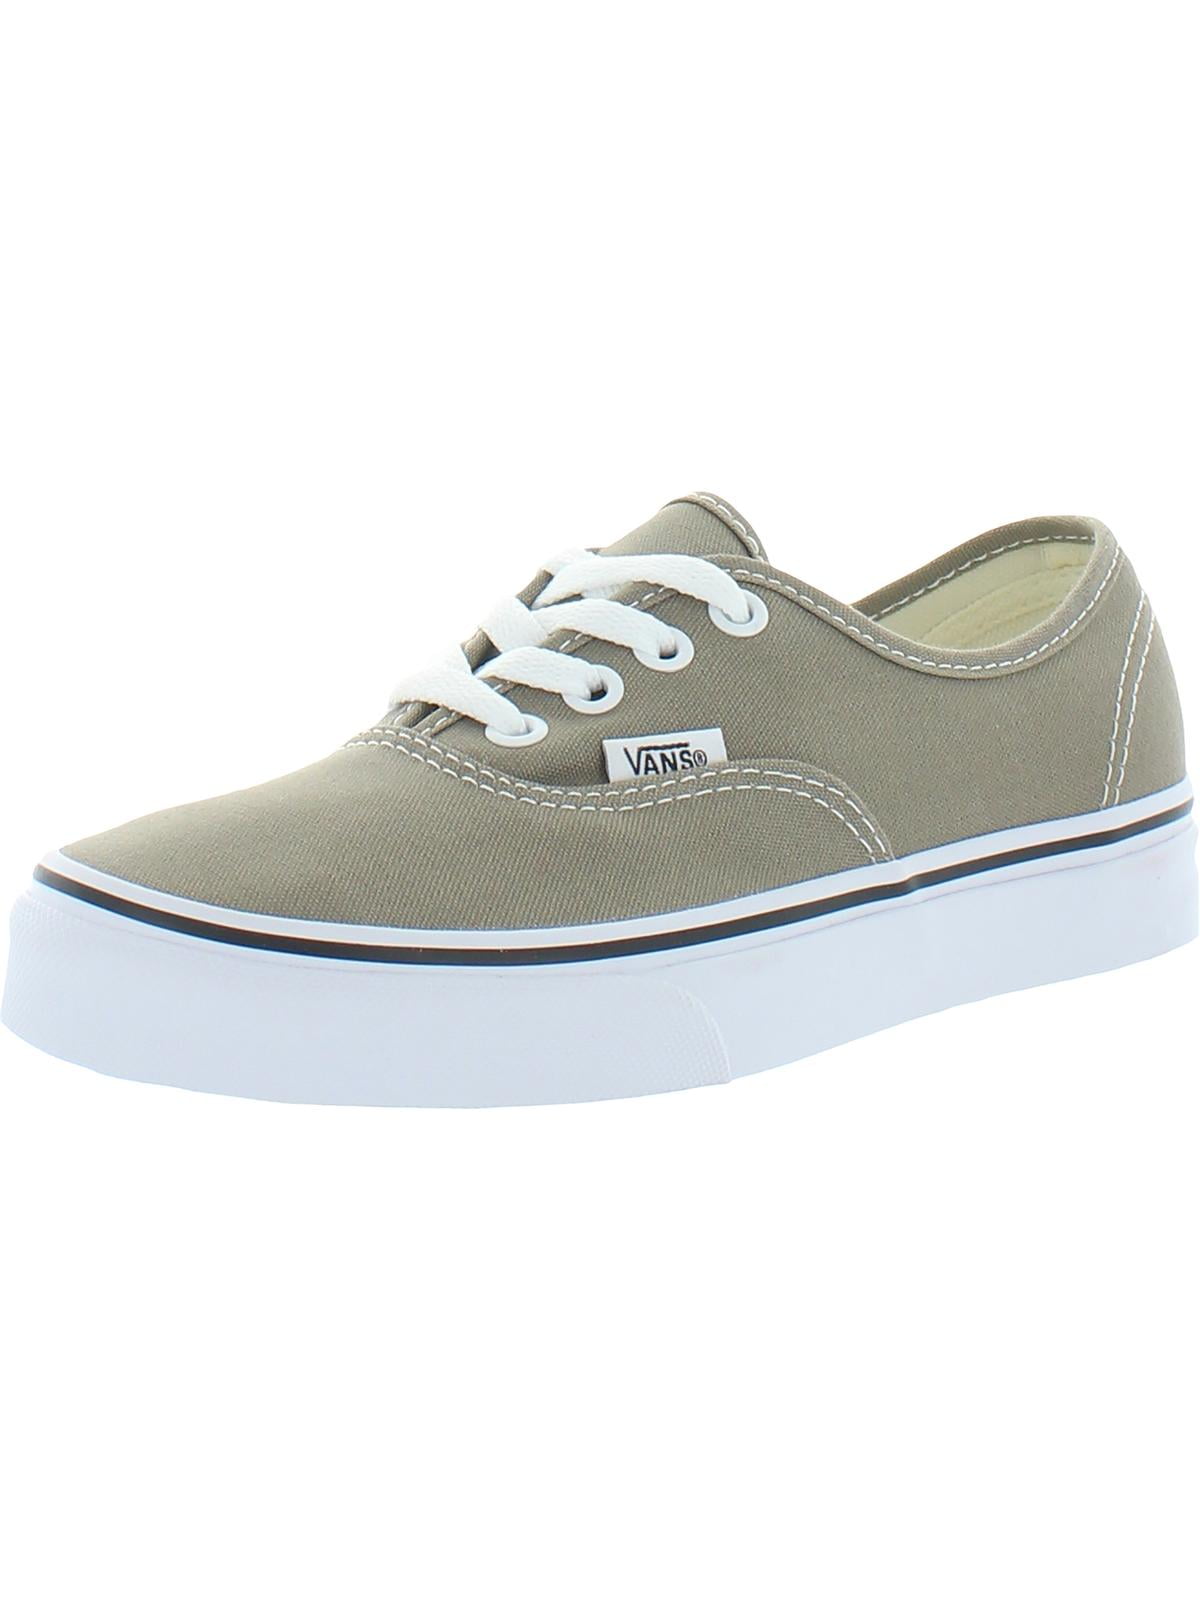 mens casual skate shoes